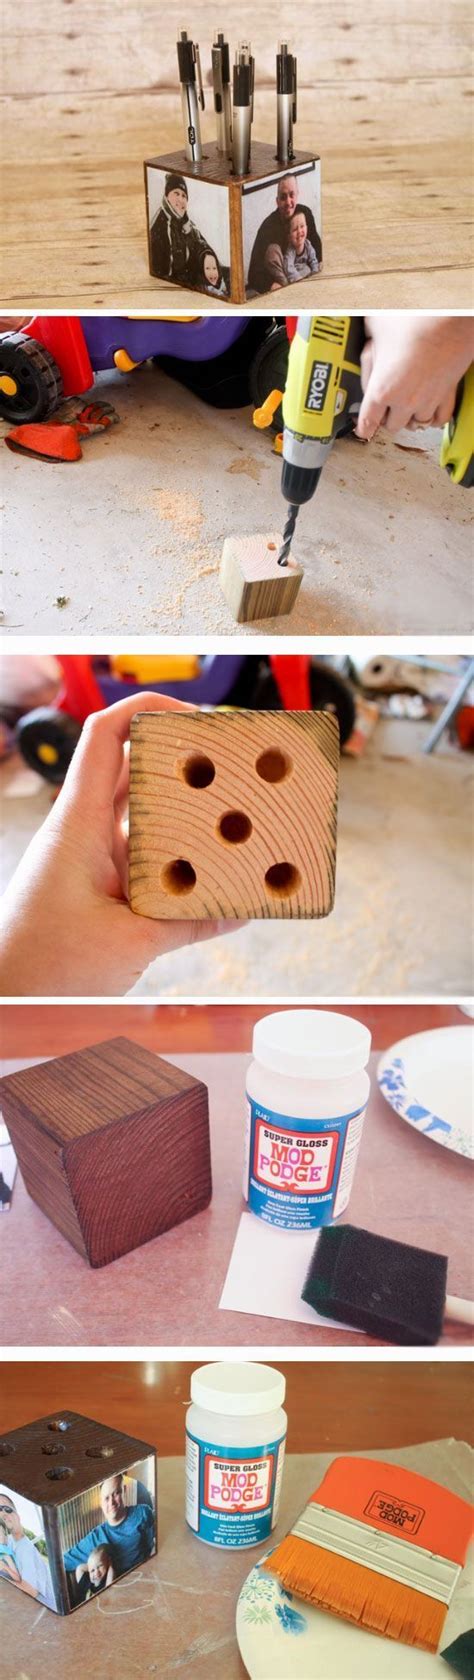 Pinterest christmas gifts for dad. 20 Easy DIY Christmas Gifts for Grandfather | Diy ...